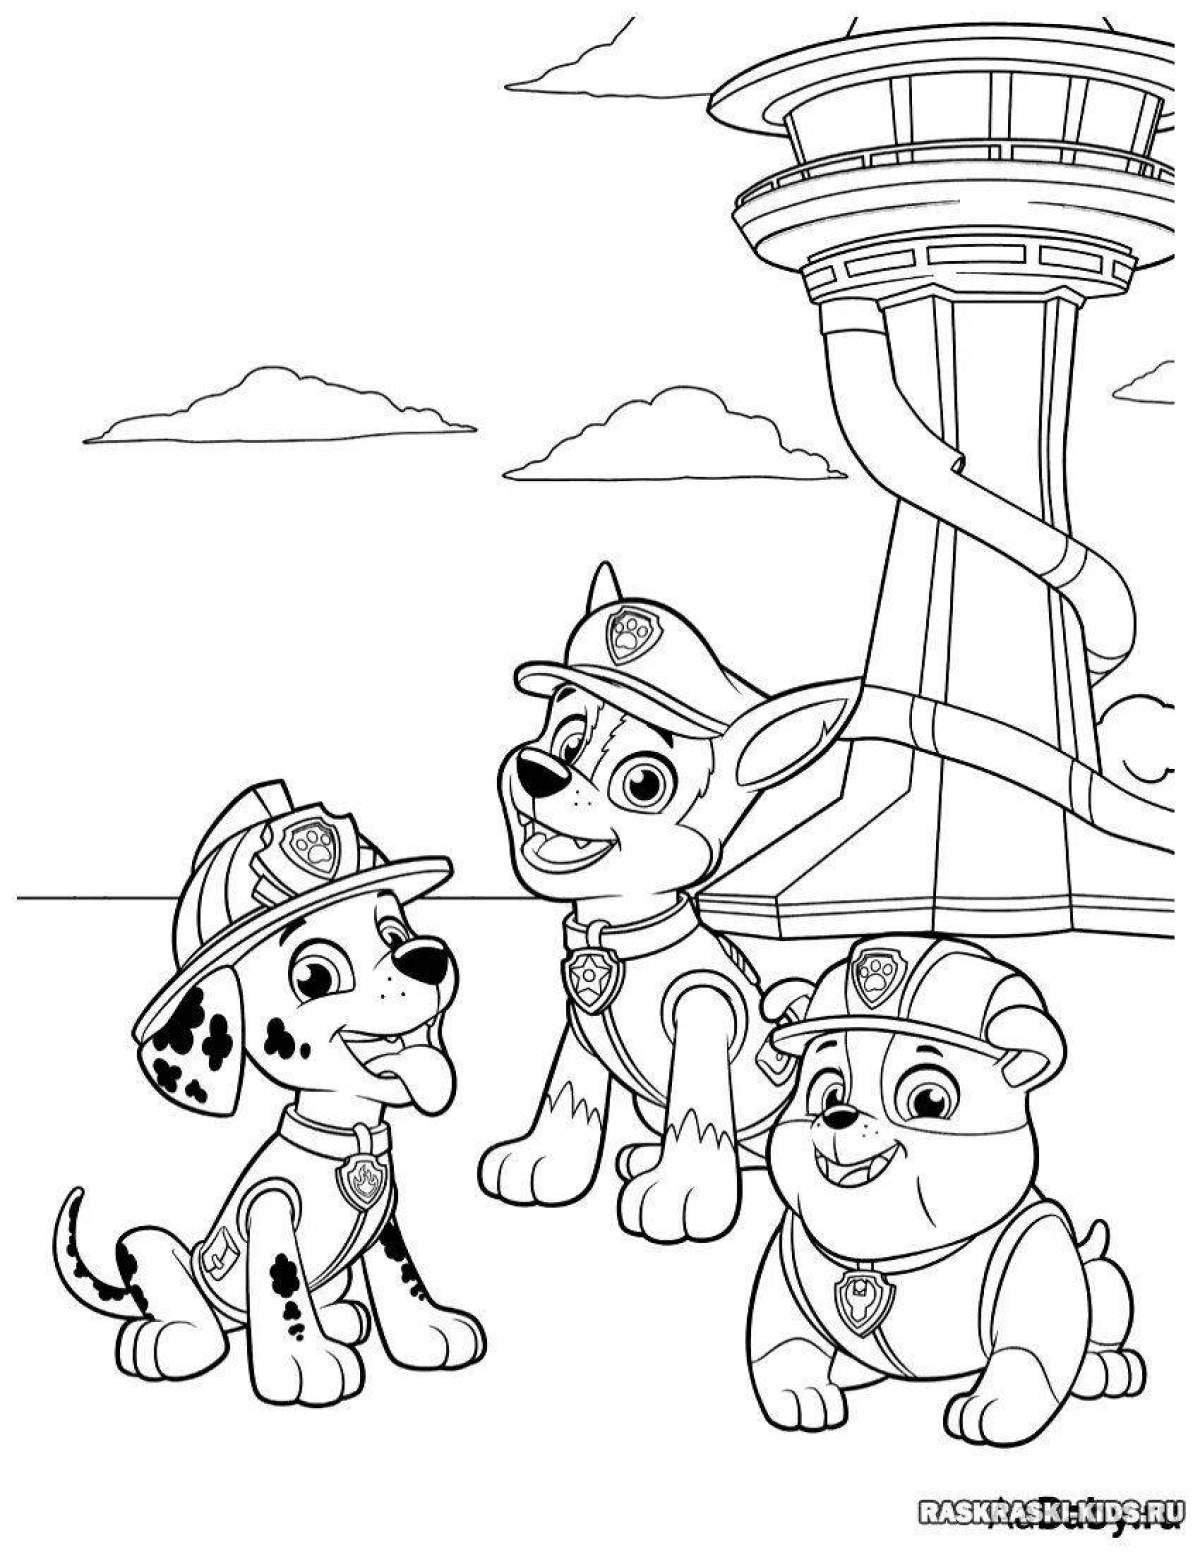 Adorable paw patrol coloring page